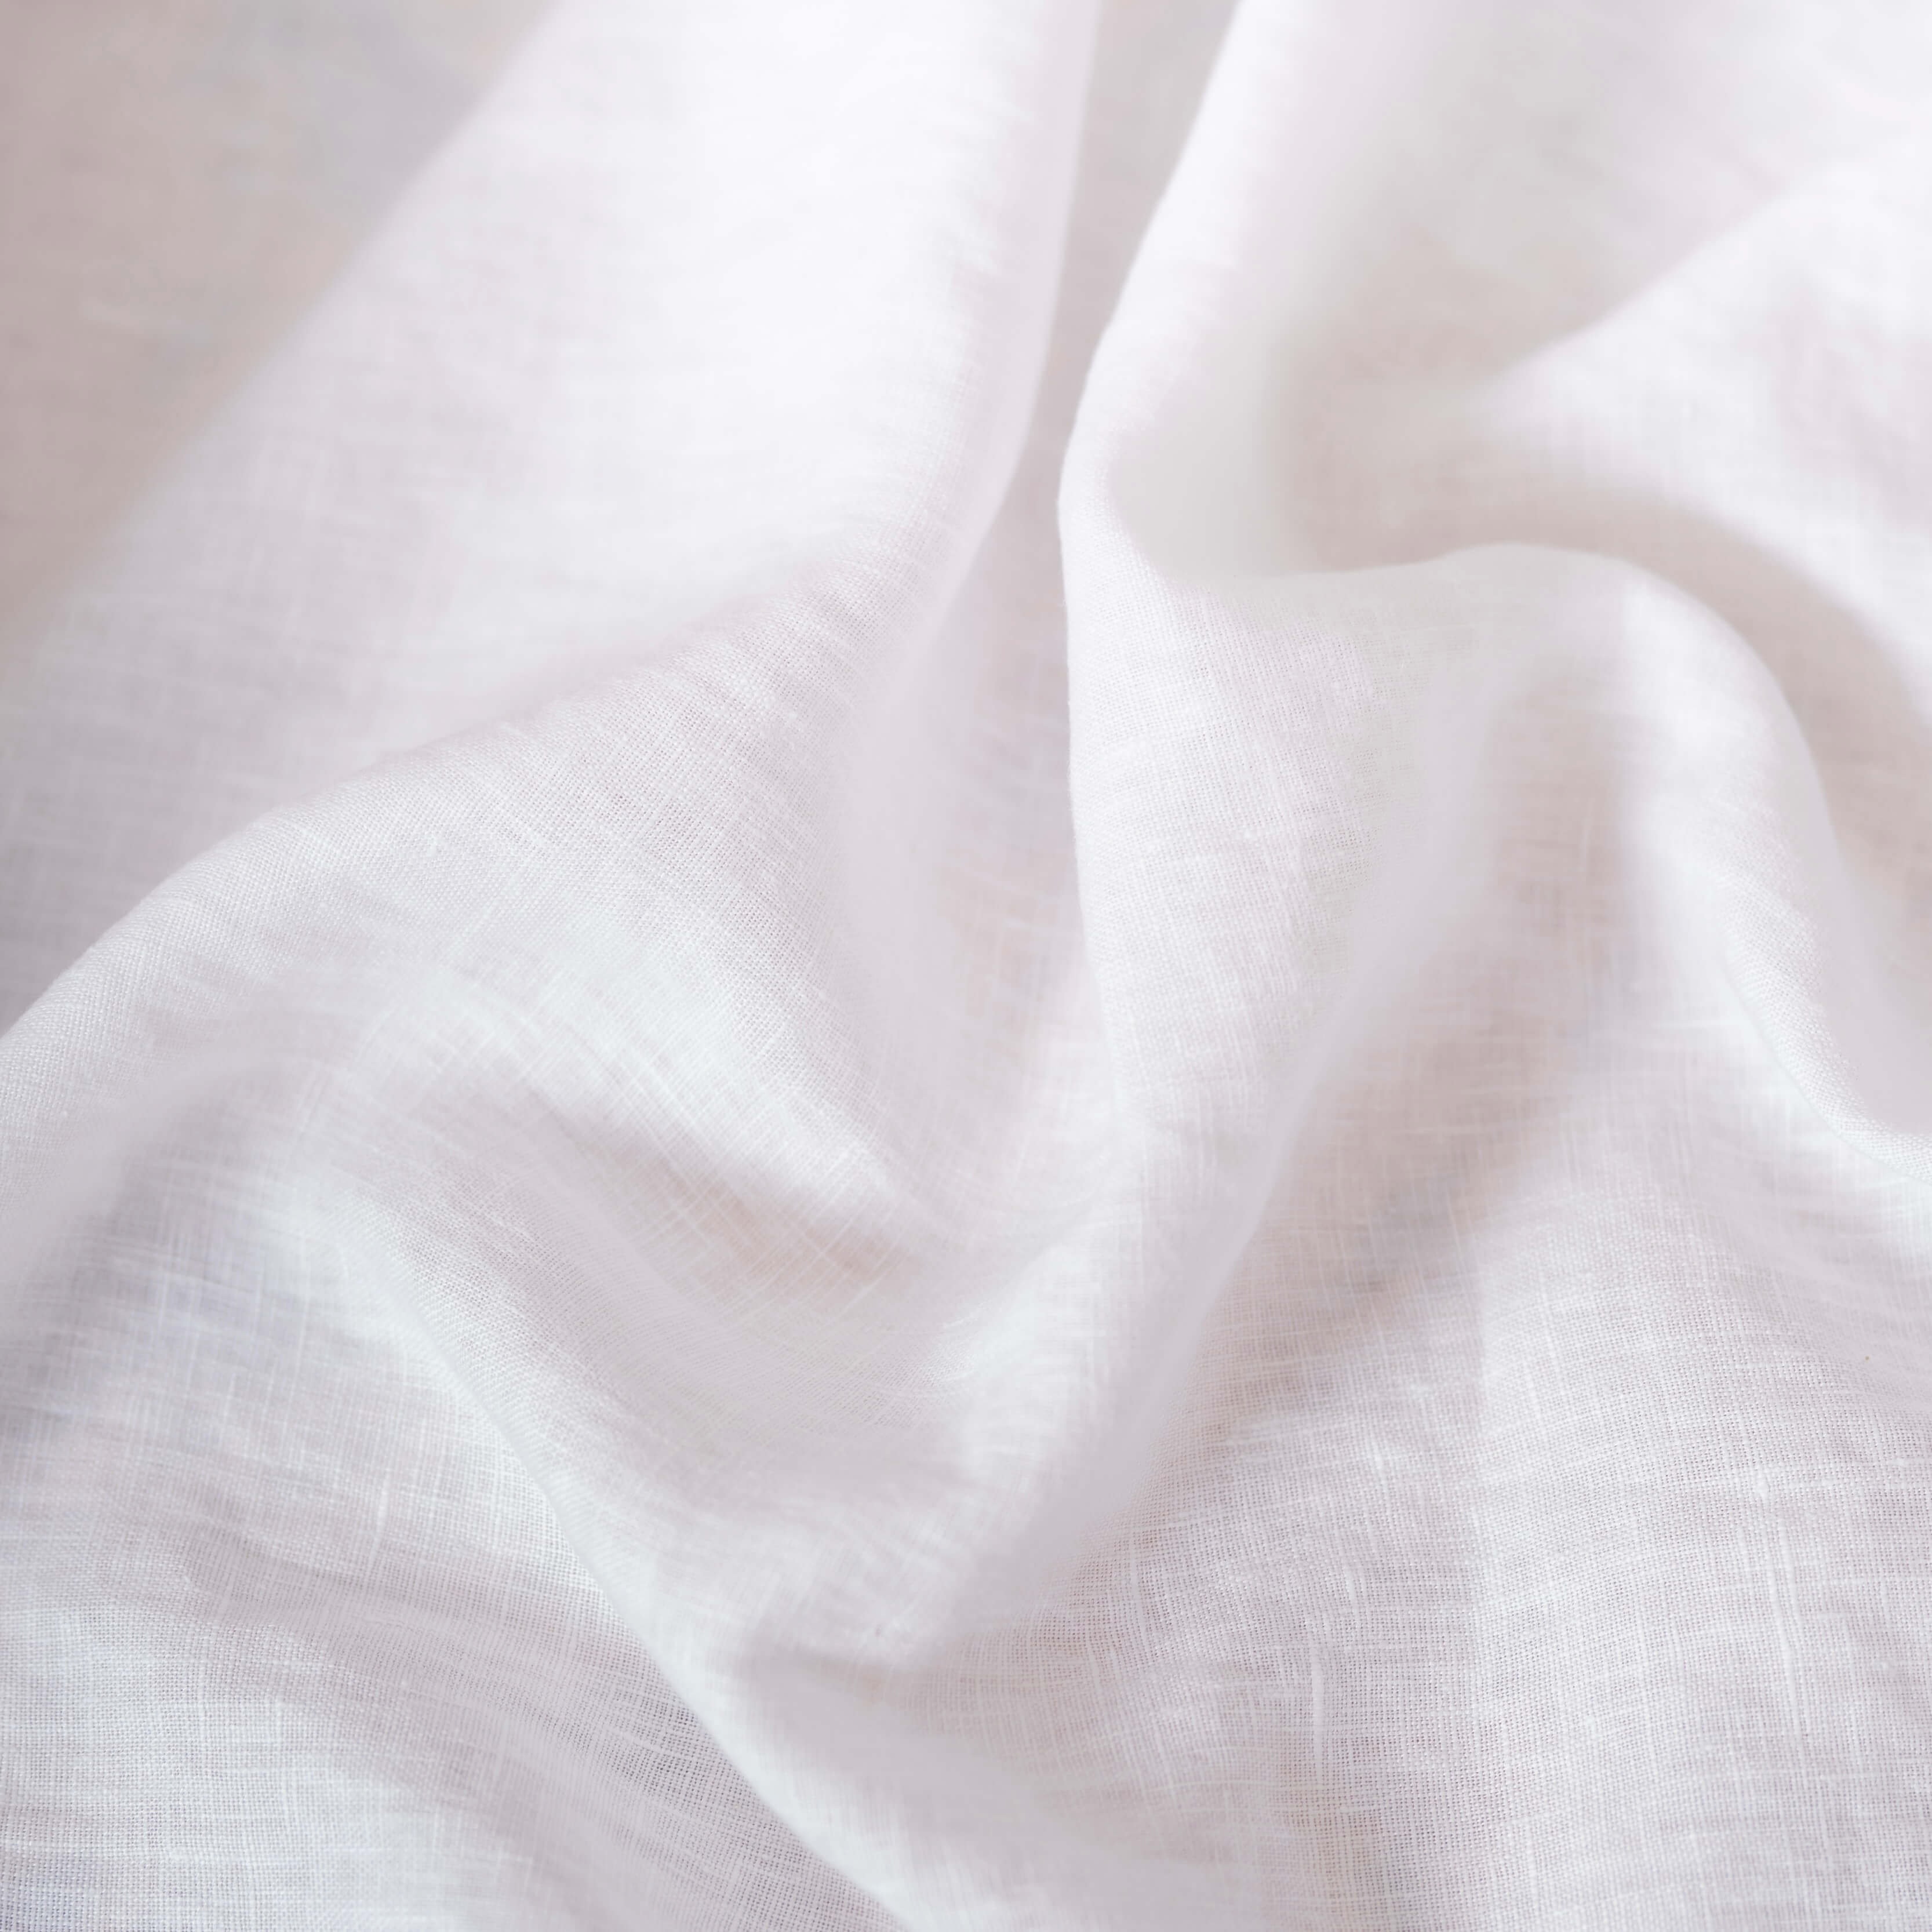 Washed Pure Bright White Linen Fabric 205 g/m²